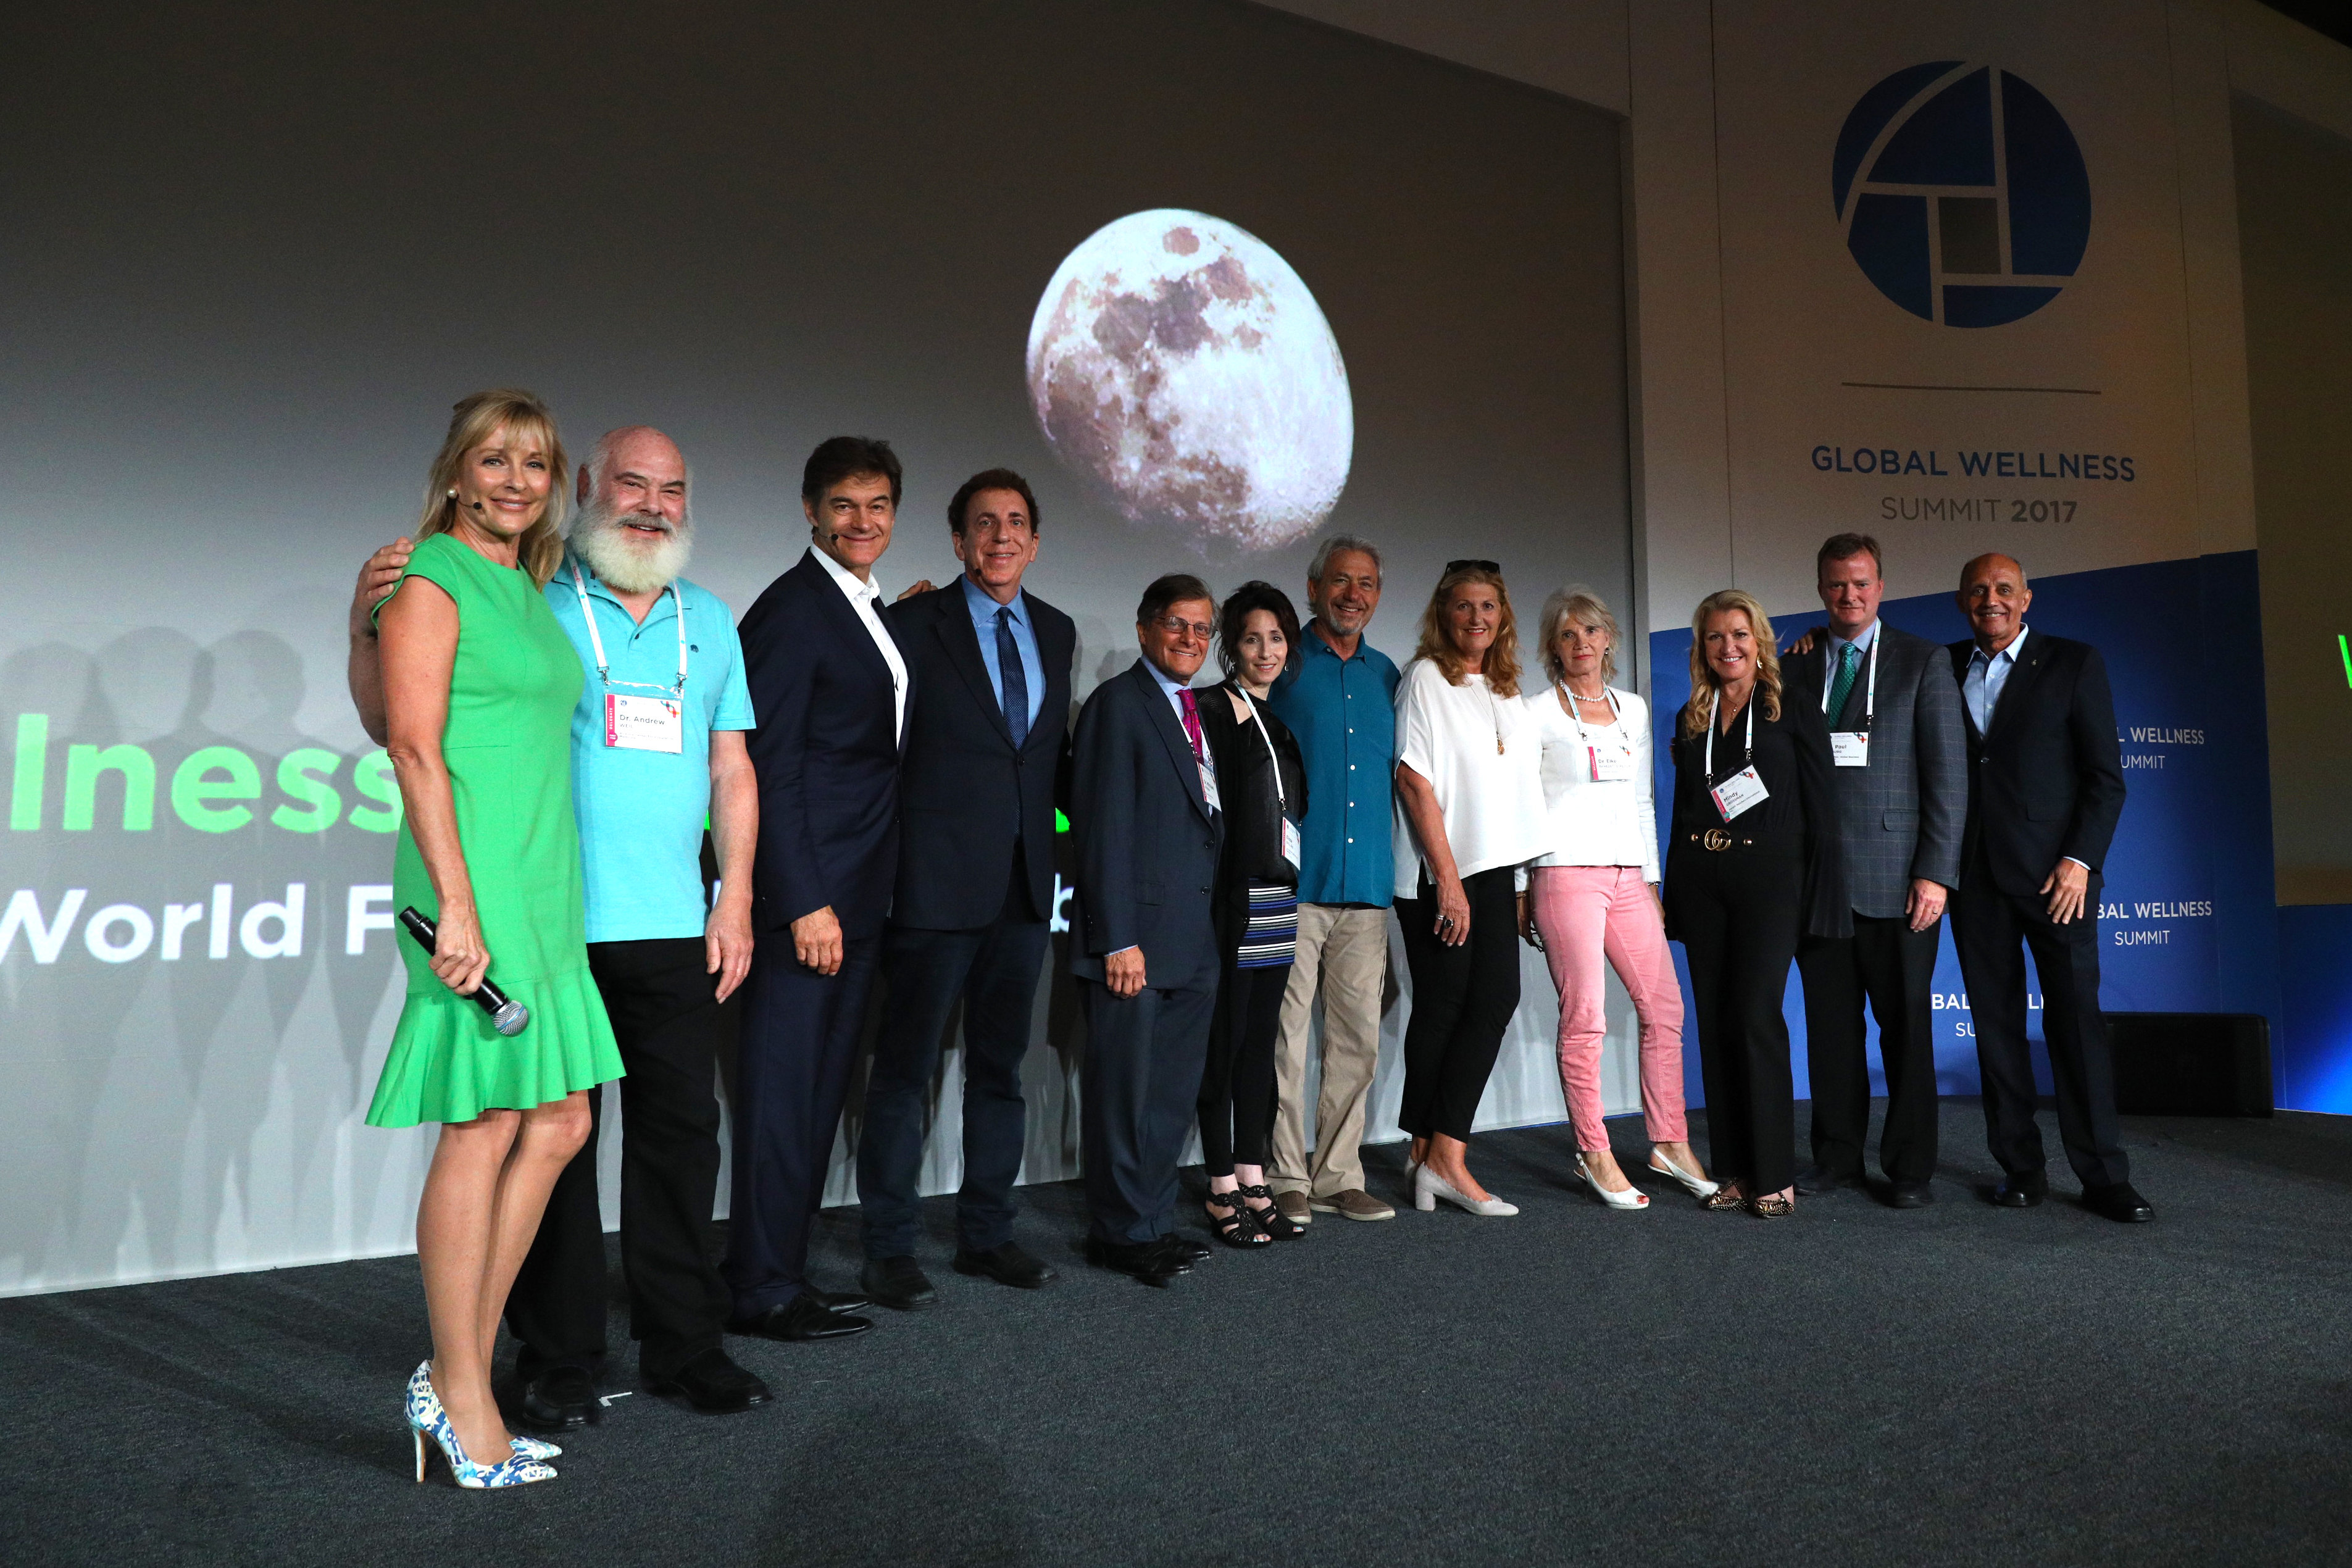 Wellness leaders pledged support for the Wellness Moonshot announced by the Global Wellness Institute at the Global Wellness Summit, which was held at The Breakers Palm Beach.